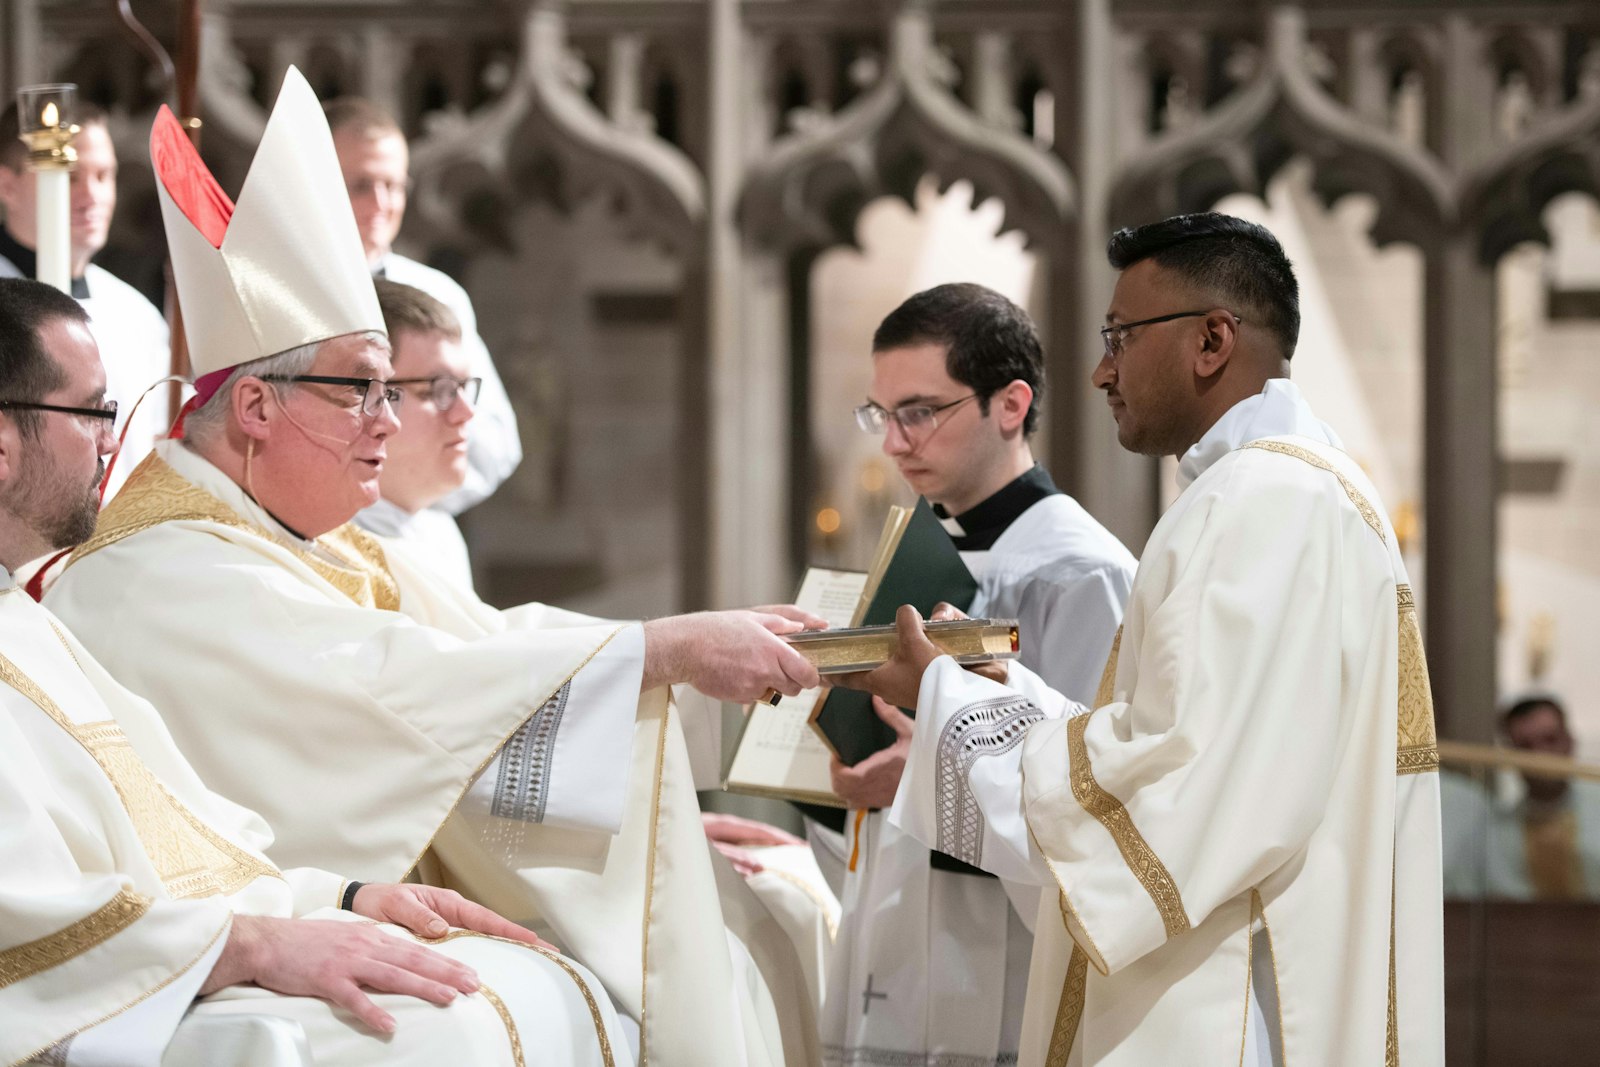 Bishop Battersby entrusts the book of the Gospels to then-Deacon Michael Bruno Selvaraj after ordaining him to the transitional diaconate April 23, 2022, at the Cathedral of the Most Blessed Sacrament in Detroit. (Tim Fuller | Special to Detroit Catholic)